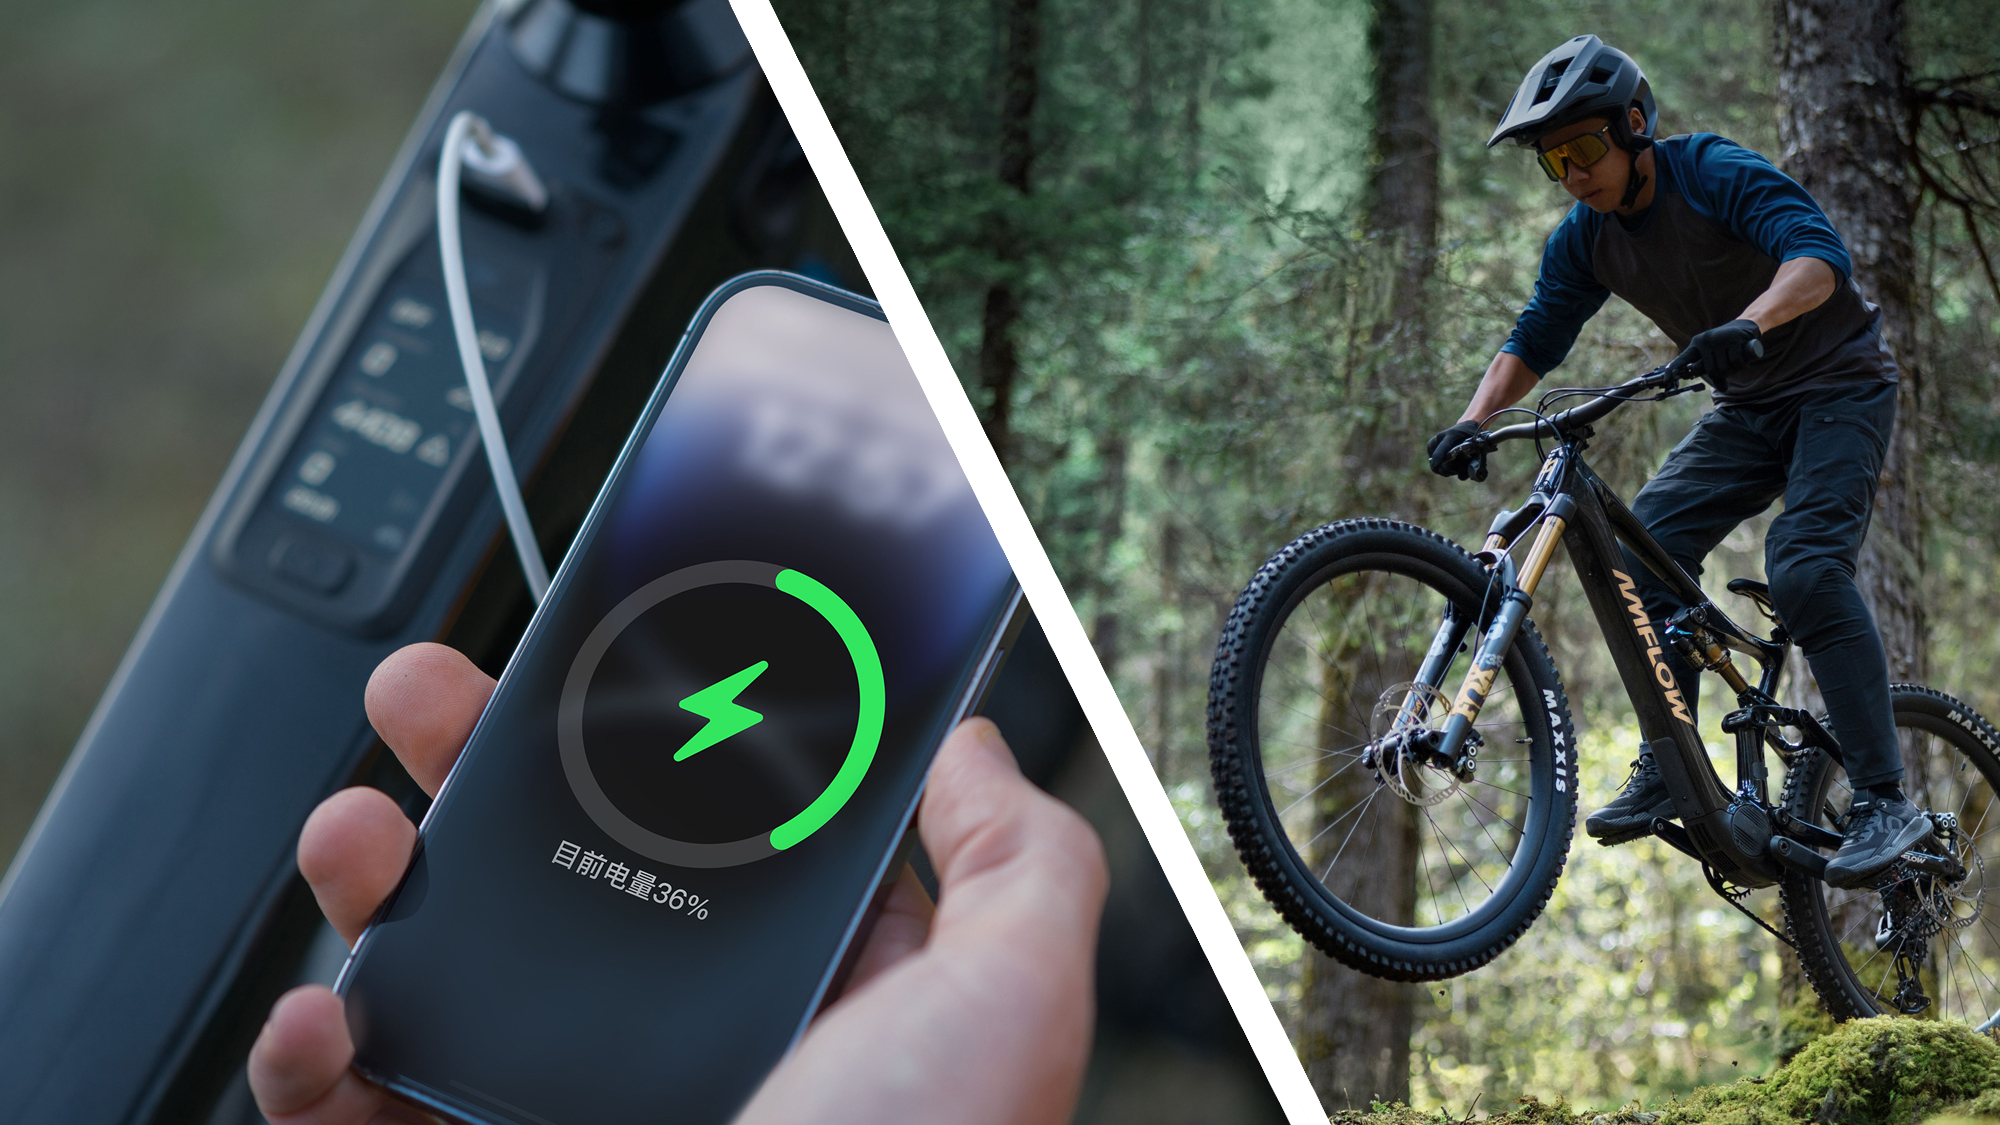 DJI officially makes a surprise move into e-bikes – here's what you need to know